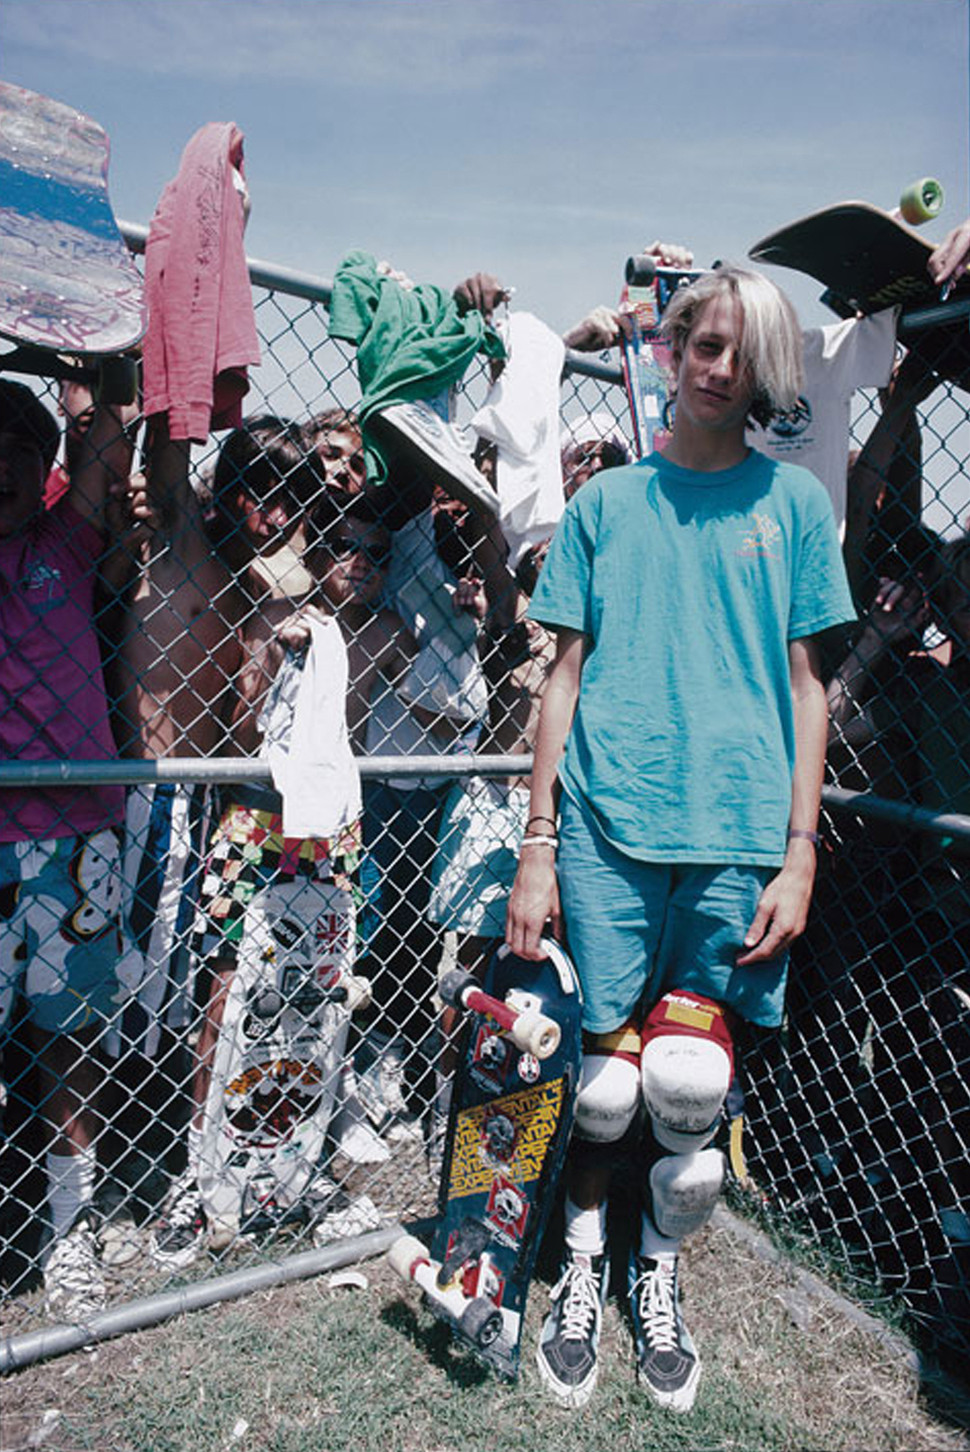 Tony Hawk at a local skate park in the 1980s